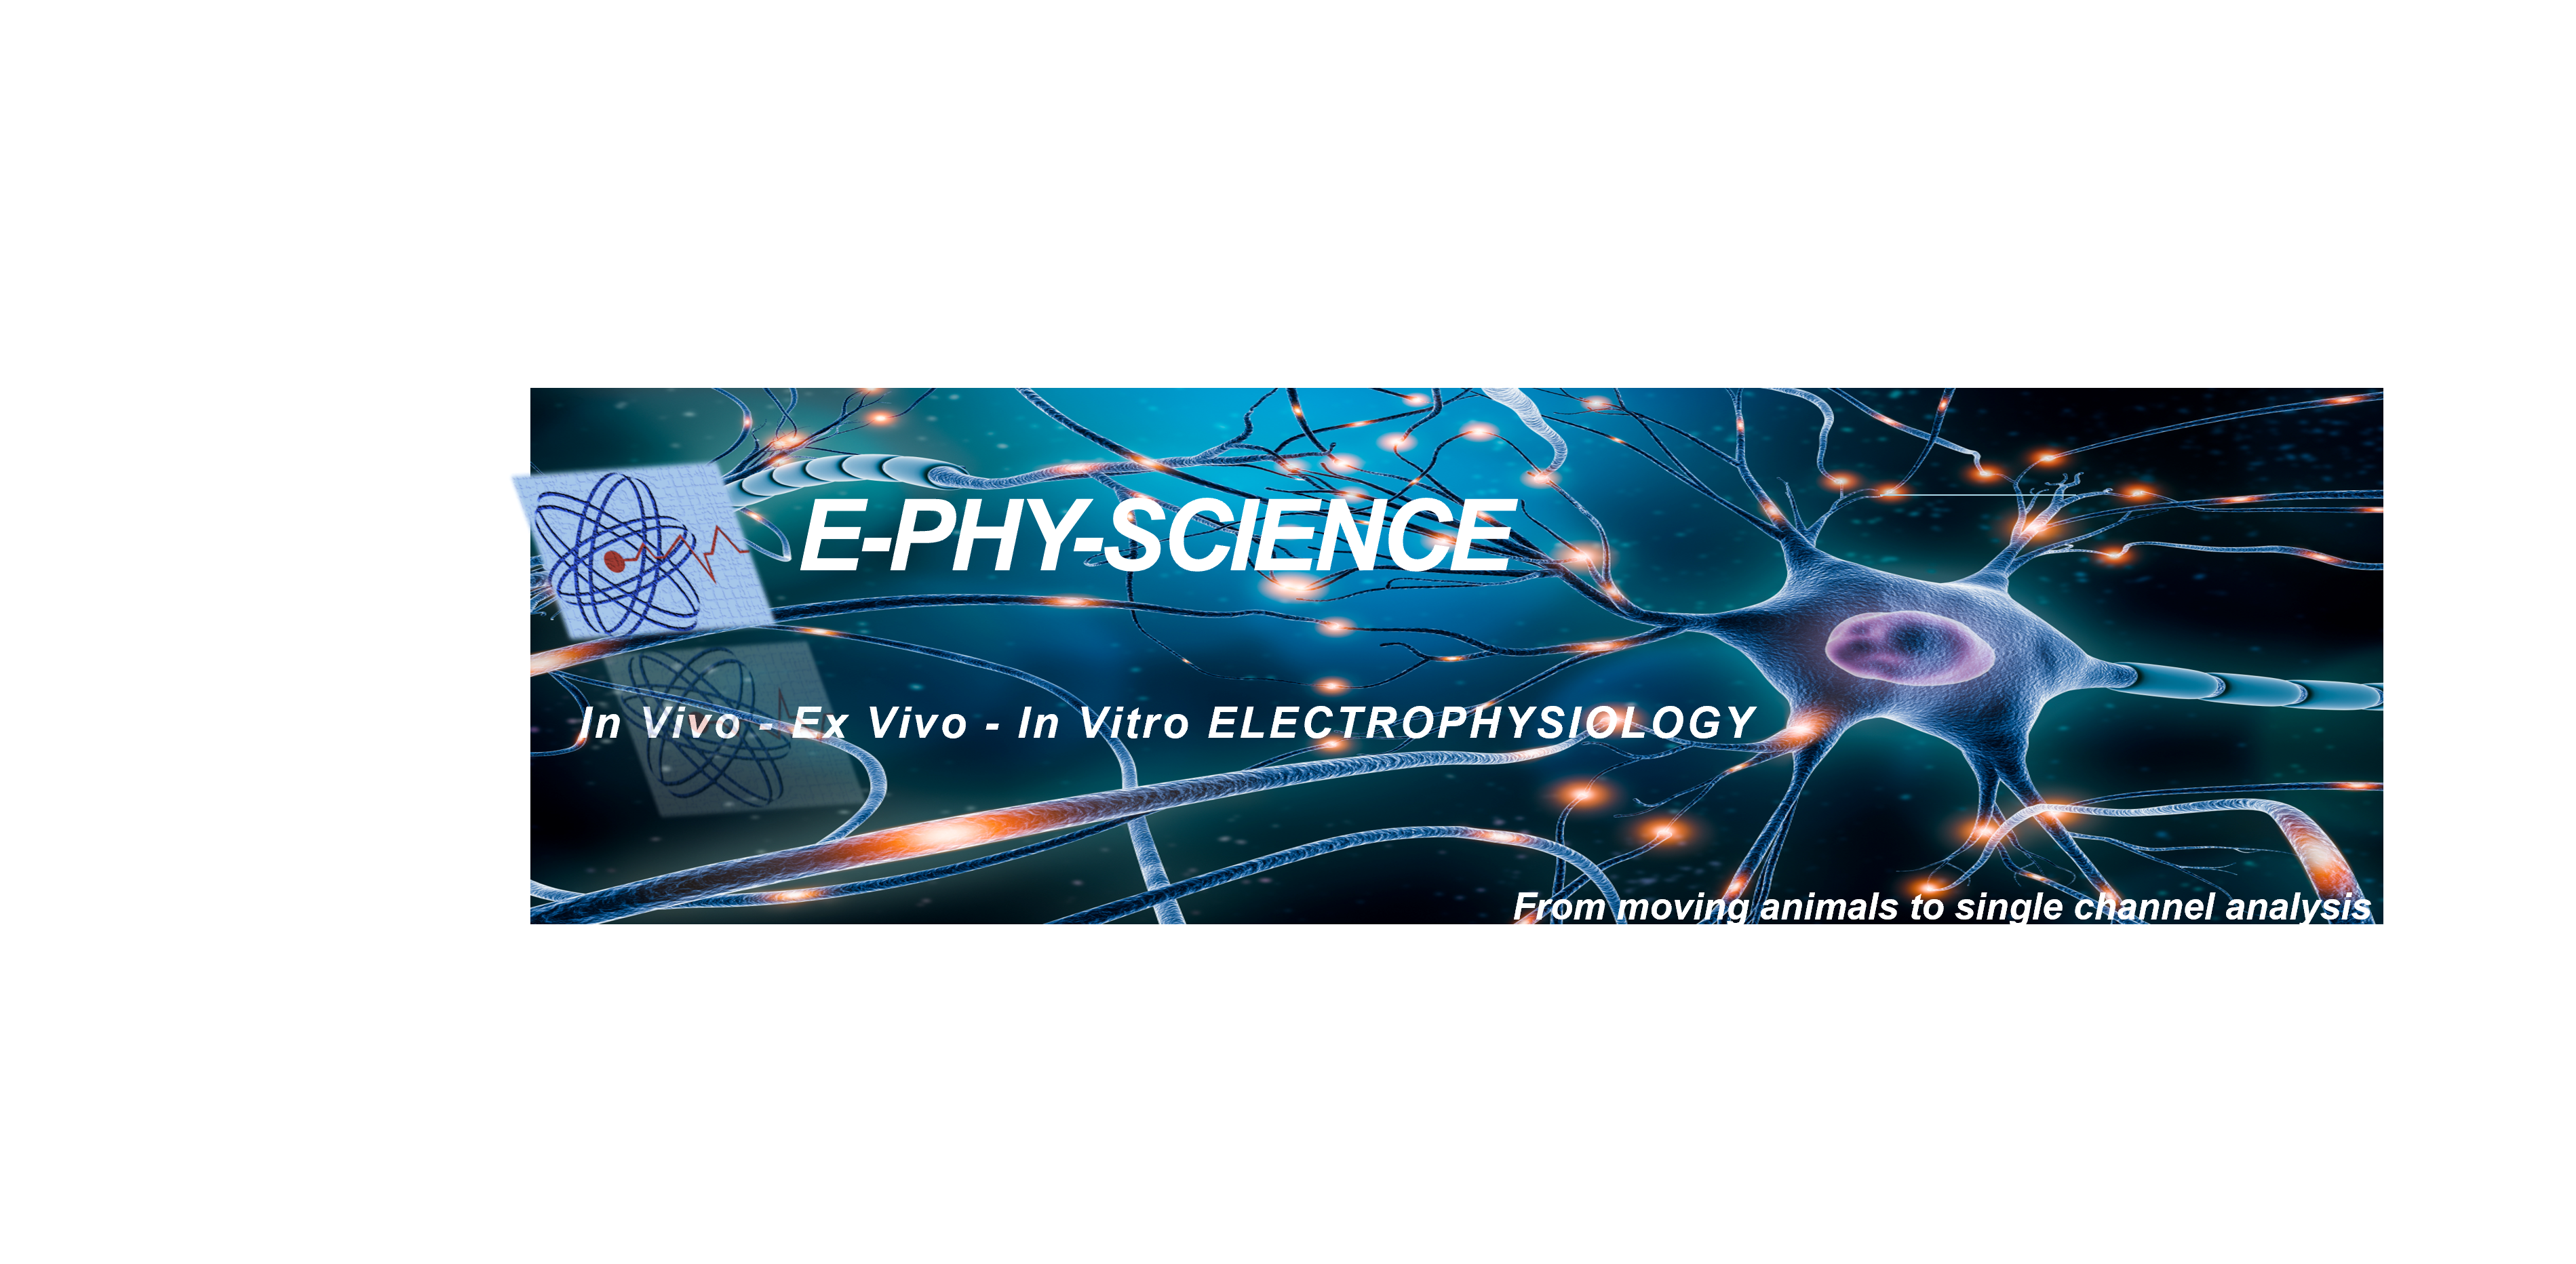 E-PHY-SCIENCE Excels in State-of-the-Art Electrophysiology for Advanced CNS Research. Come and visit us Booth #1908 at Neuroscience 2023, Nov 11-15 271